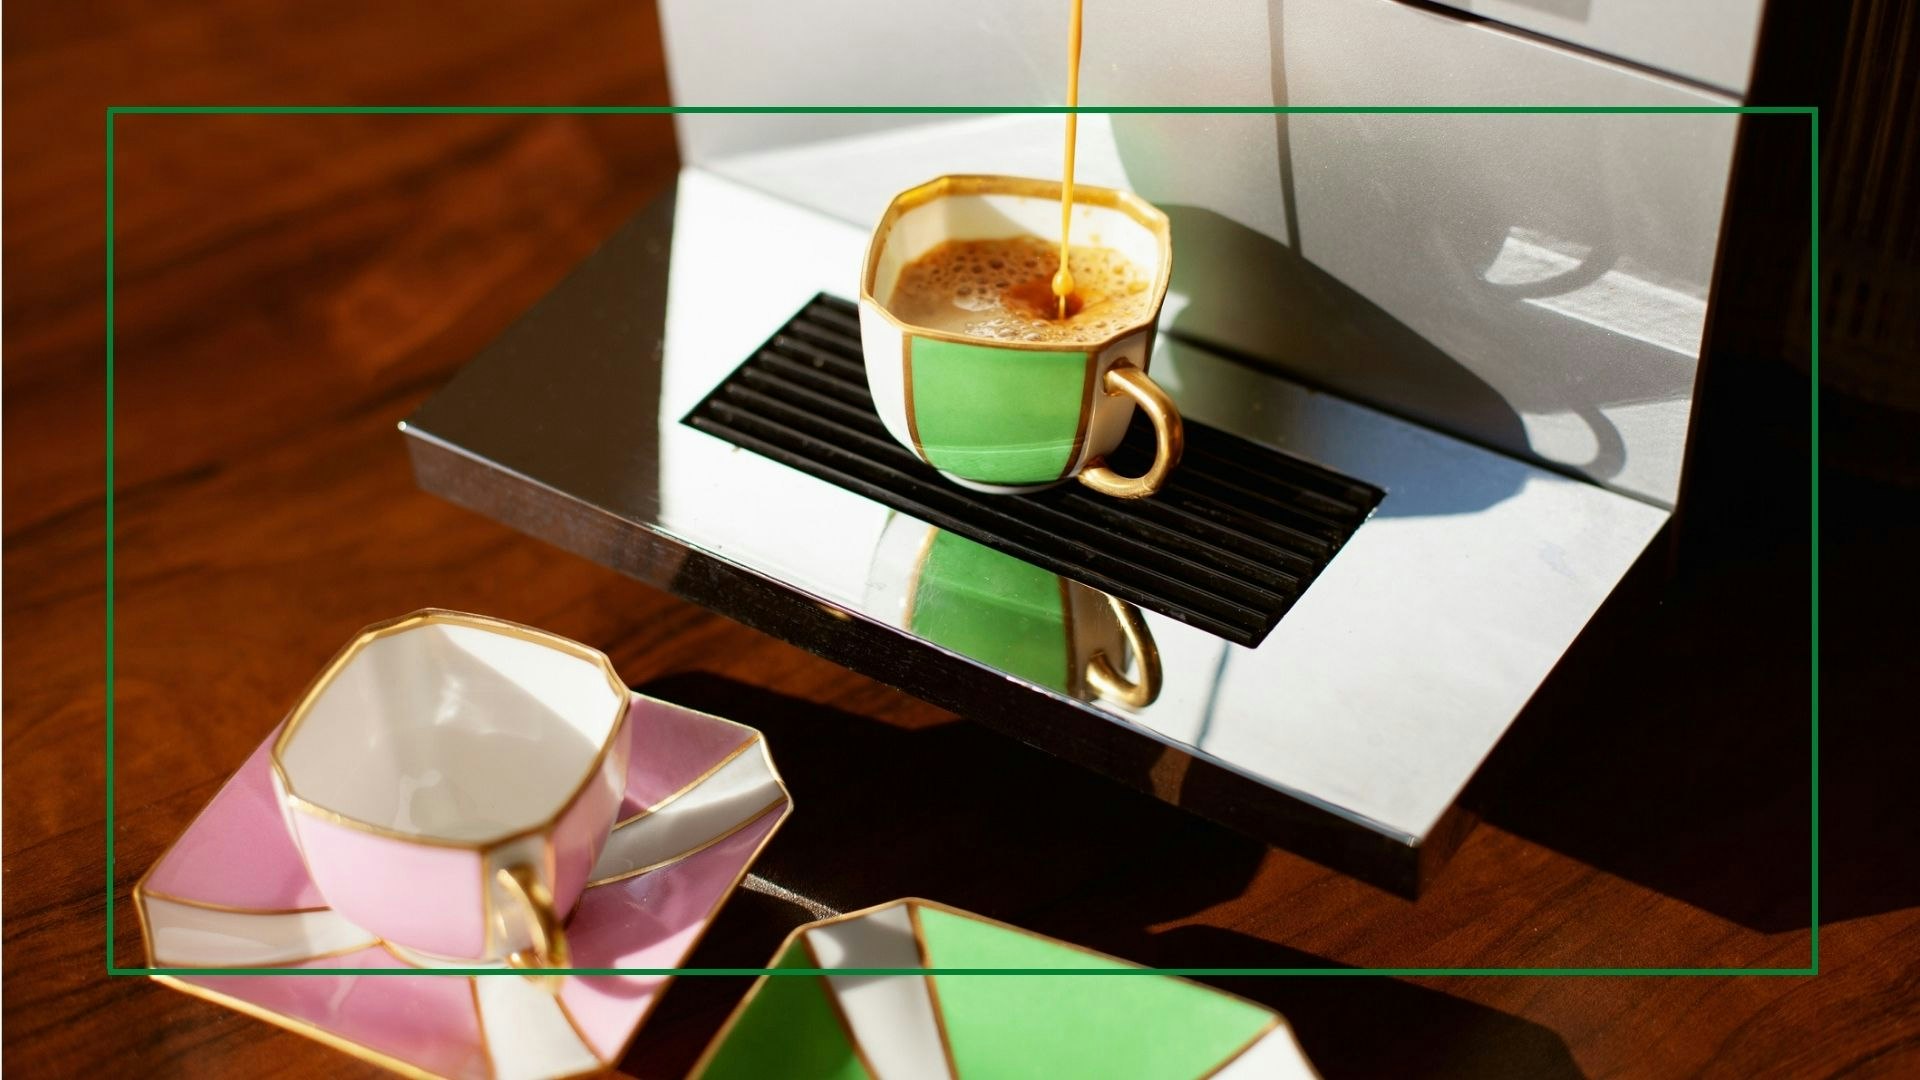 7 Best Espresso Cups (Cool and Stylish Demitasse)